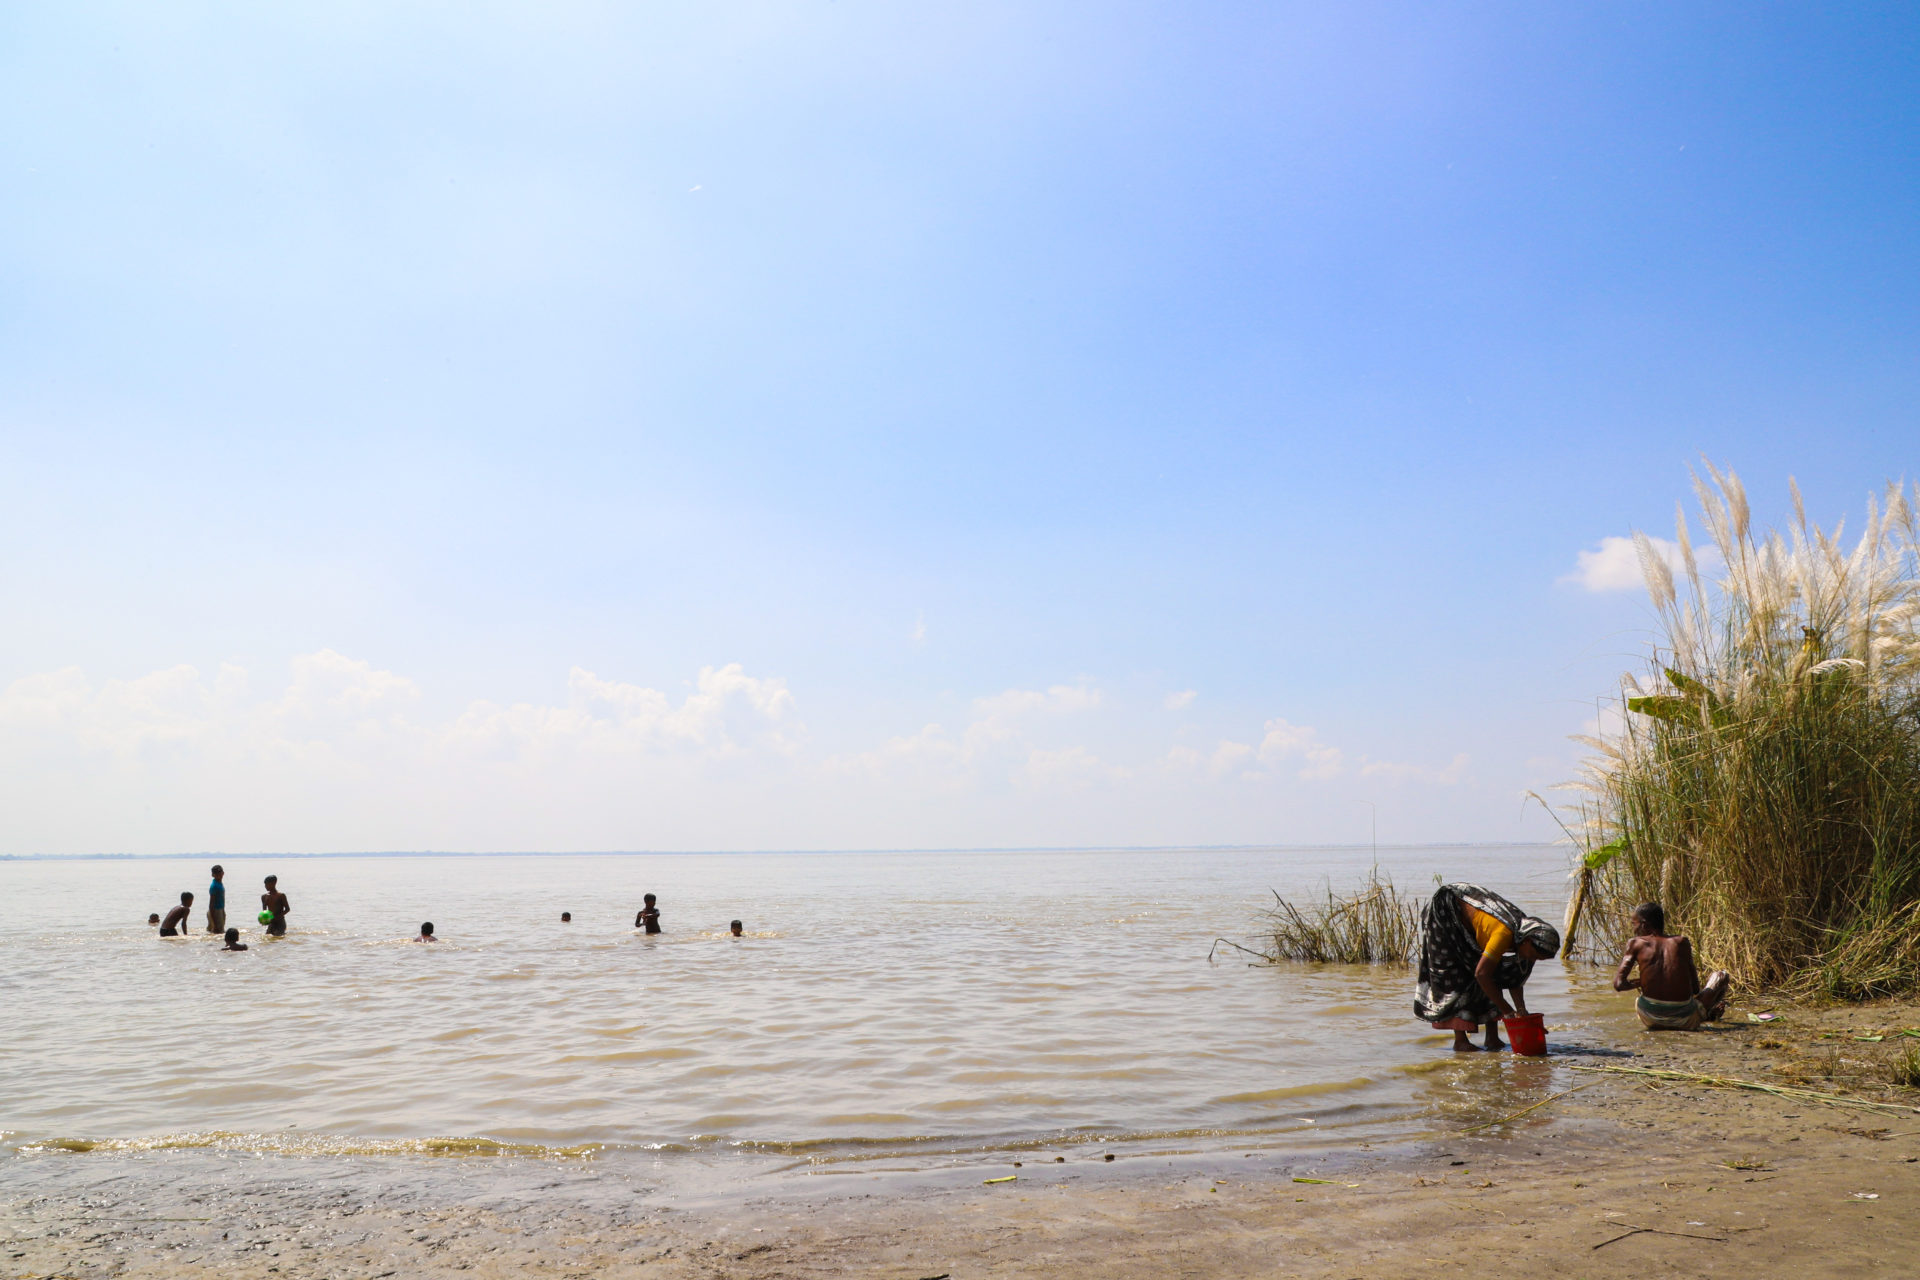 Village Couple And Children Bathing At The Bank Of Padma River In Bangladesh